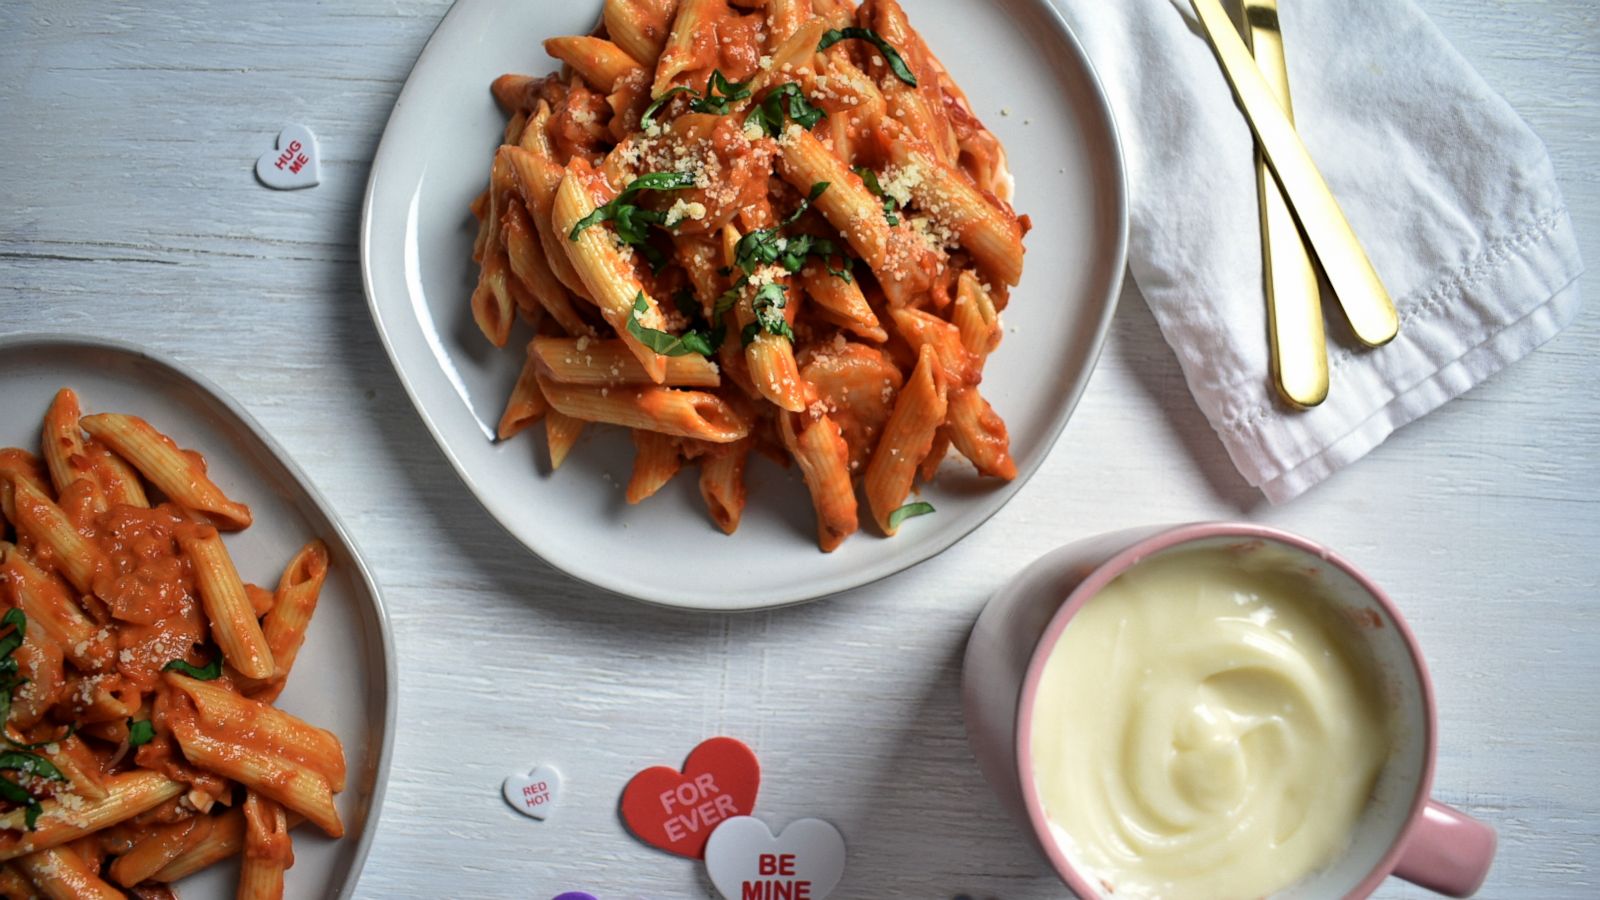 PHOTO: Ayesha Curry's Valentine's Day menu includes a dish of Penne alla Vodka with shrimp.